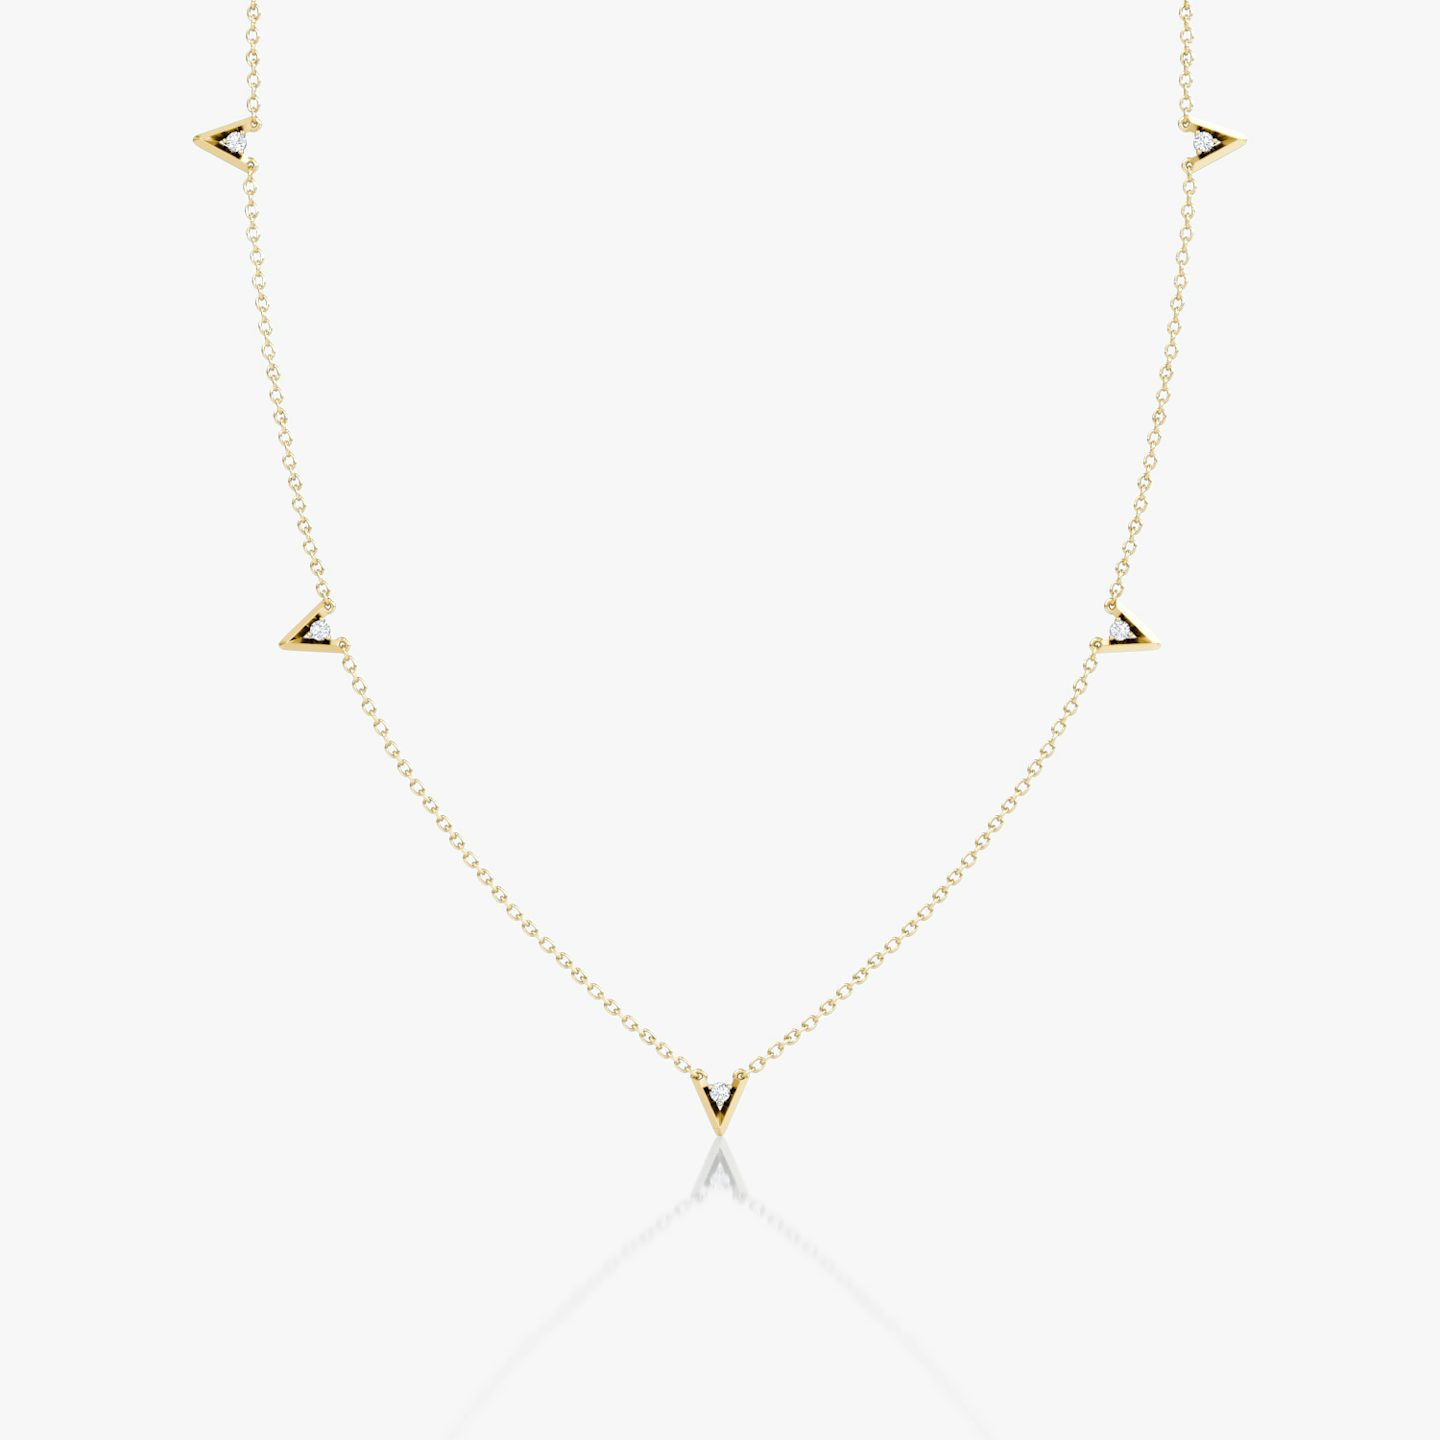 VRAI V Petite Station Necklace | Round Brilliant | 14k | 18k Yellow Gold | Chain length: 16-18